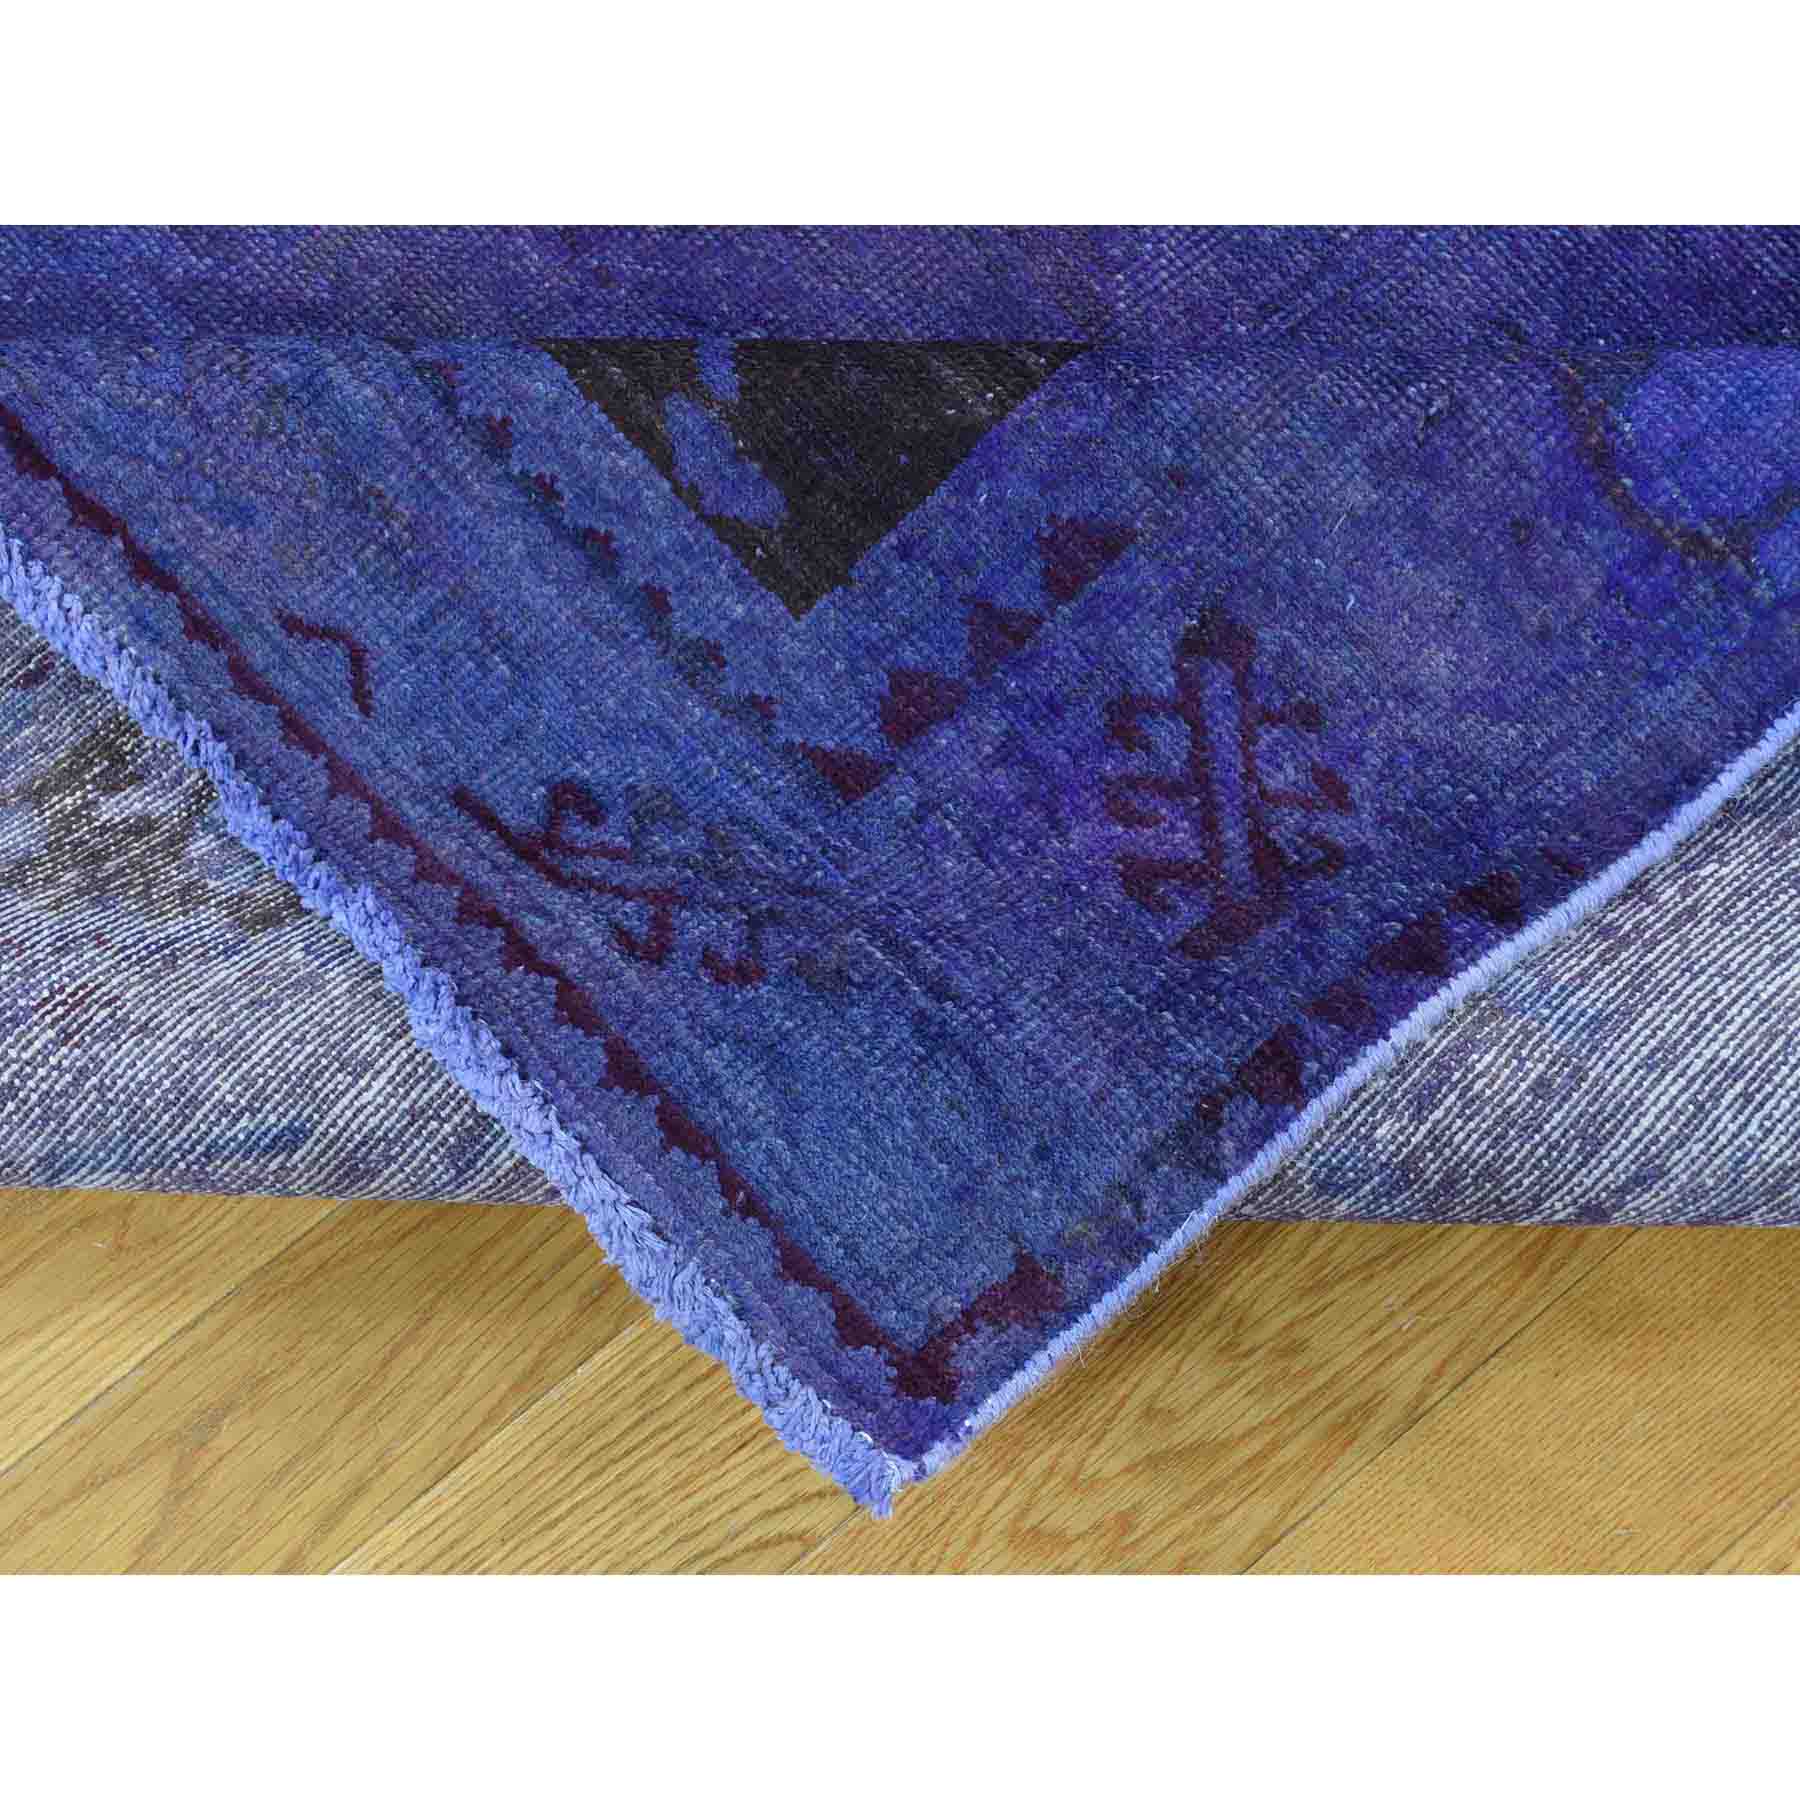 Overdyed-Vintage-Hand-Knotted-Rug-178430